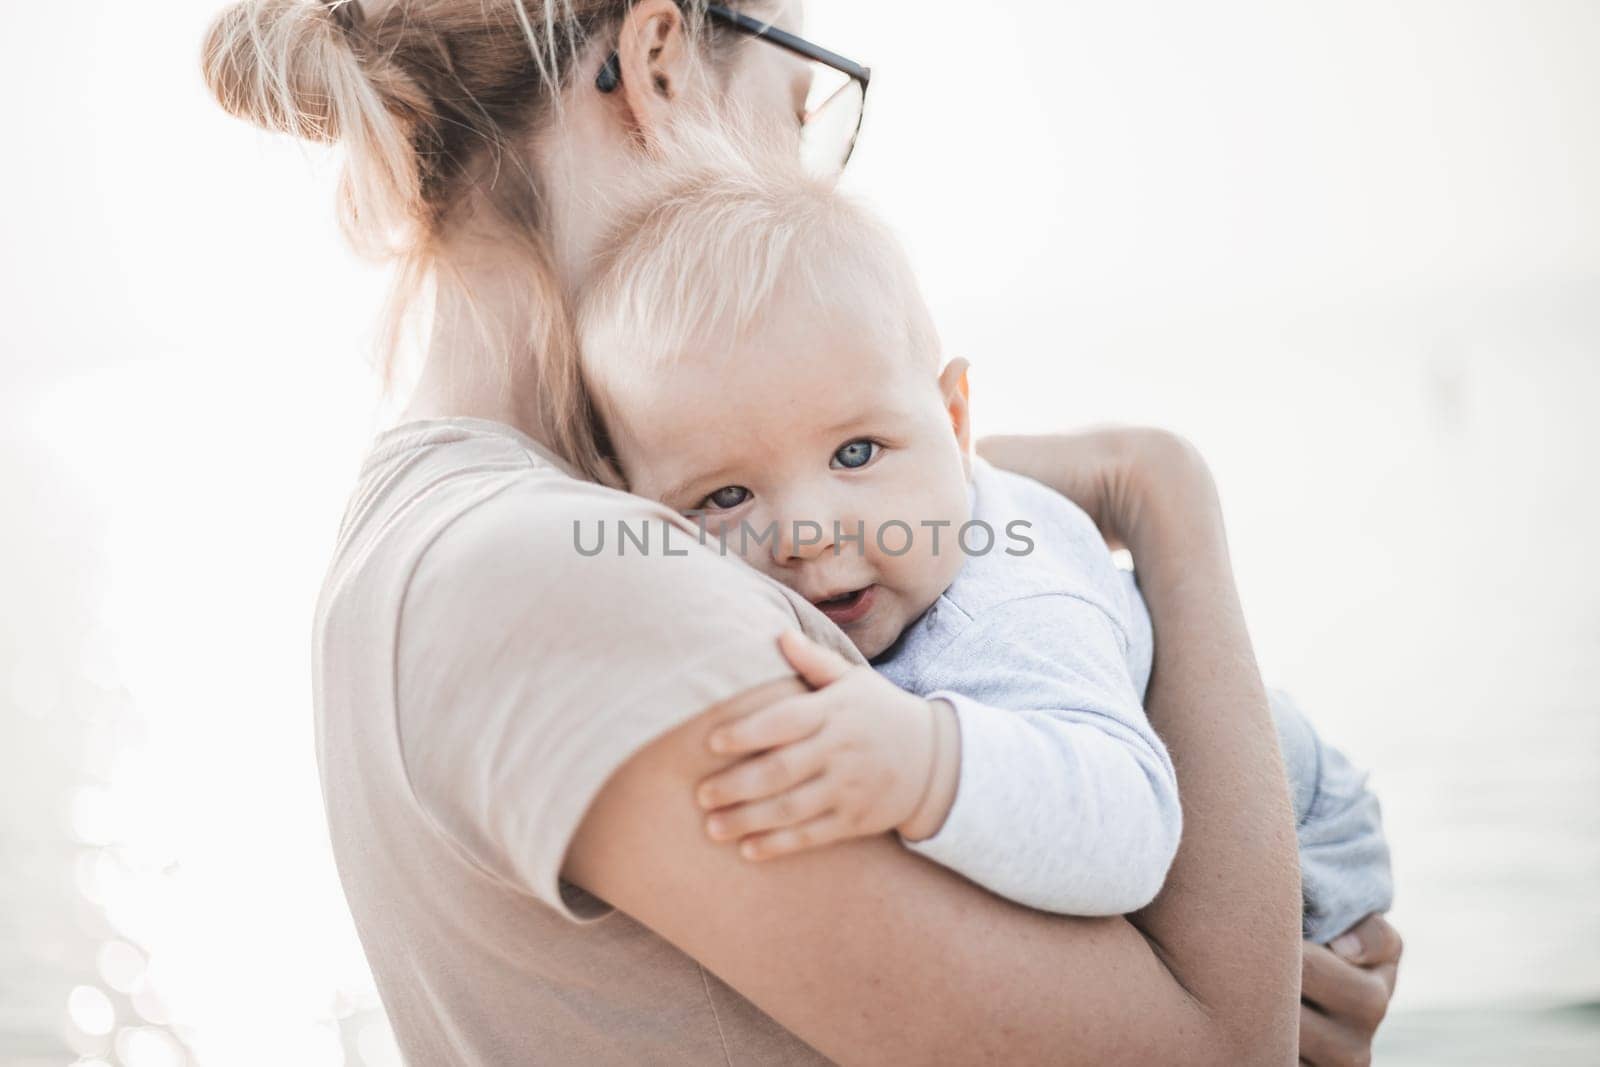 Tender woman caressing her little baby boy infant child outdoors. Mother's unconditional love for her child by kasto